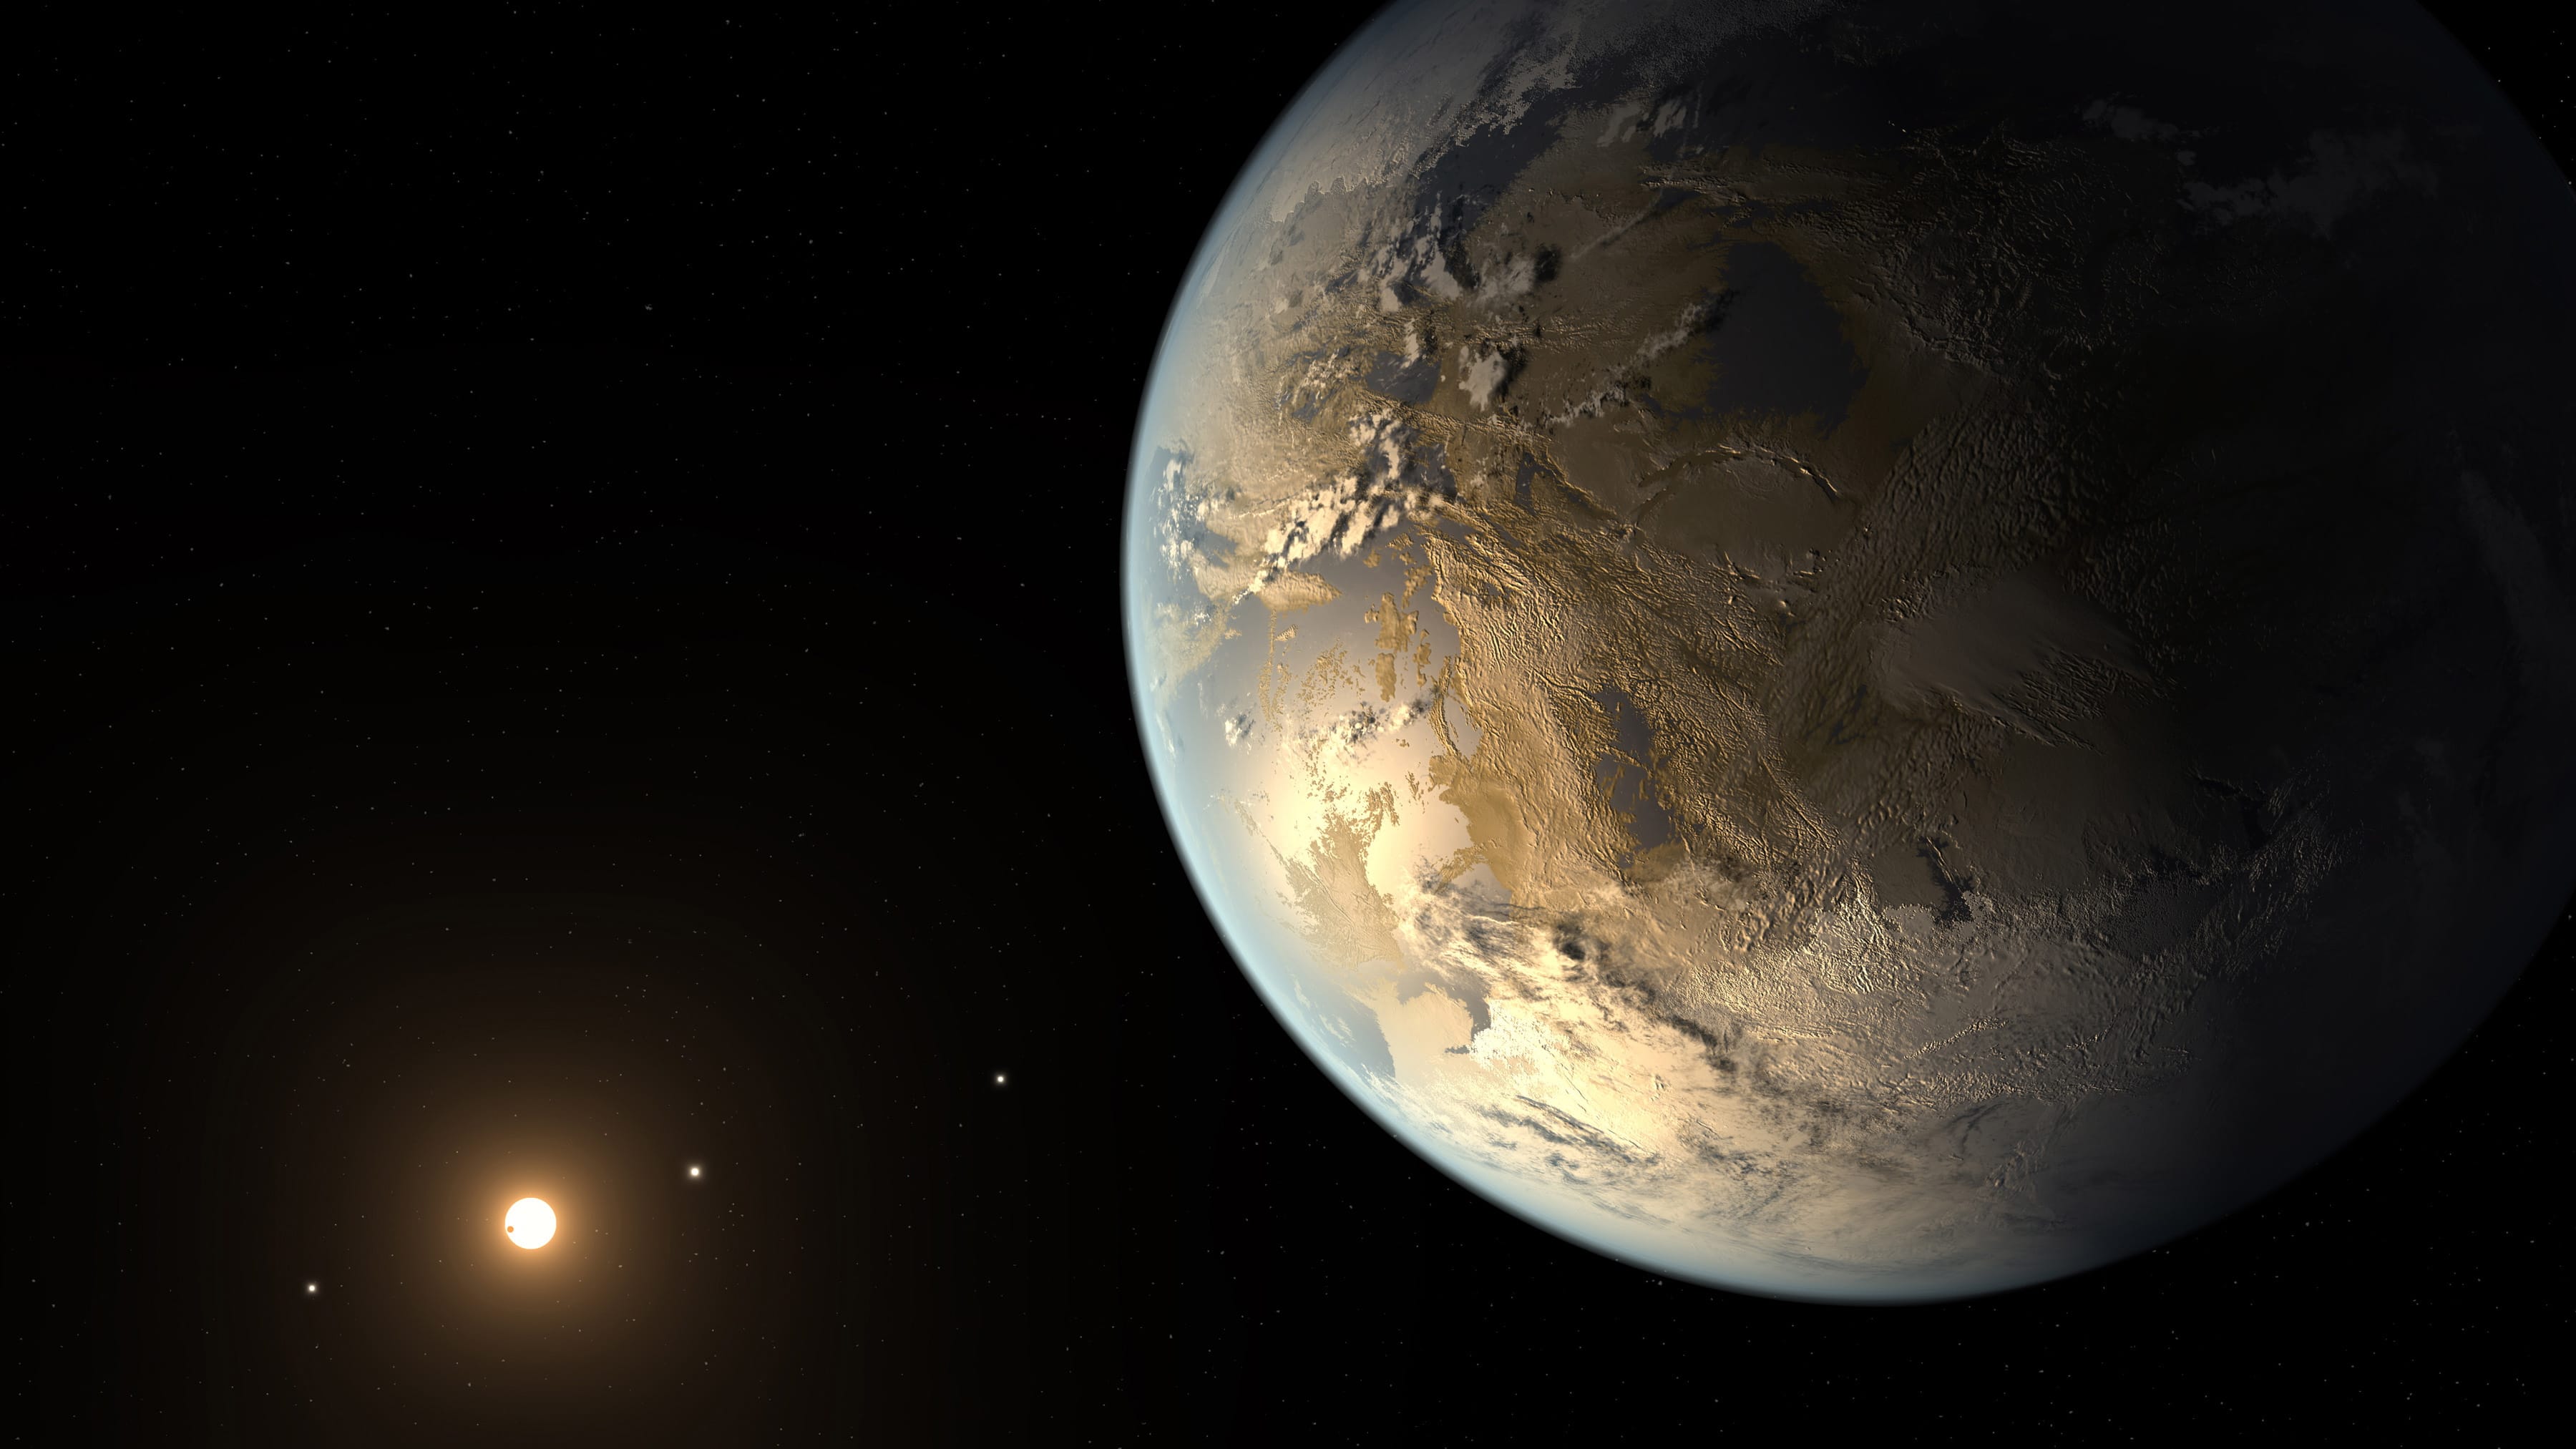 This artist's rendering shows the Earth-sized planet dubbed Kepler-186f orbiting a star 500 light-years from Earth.